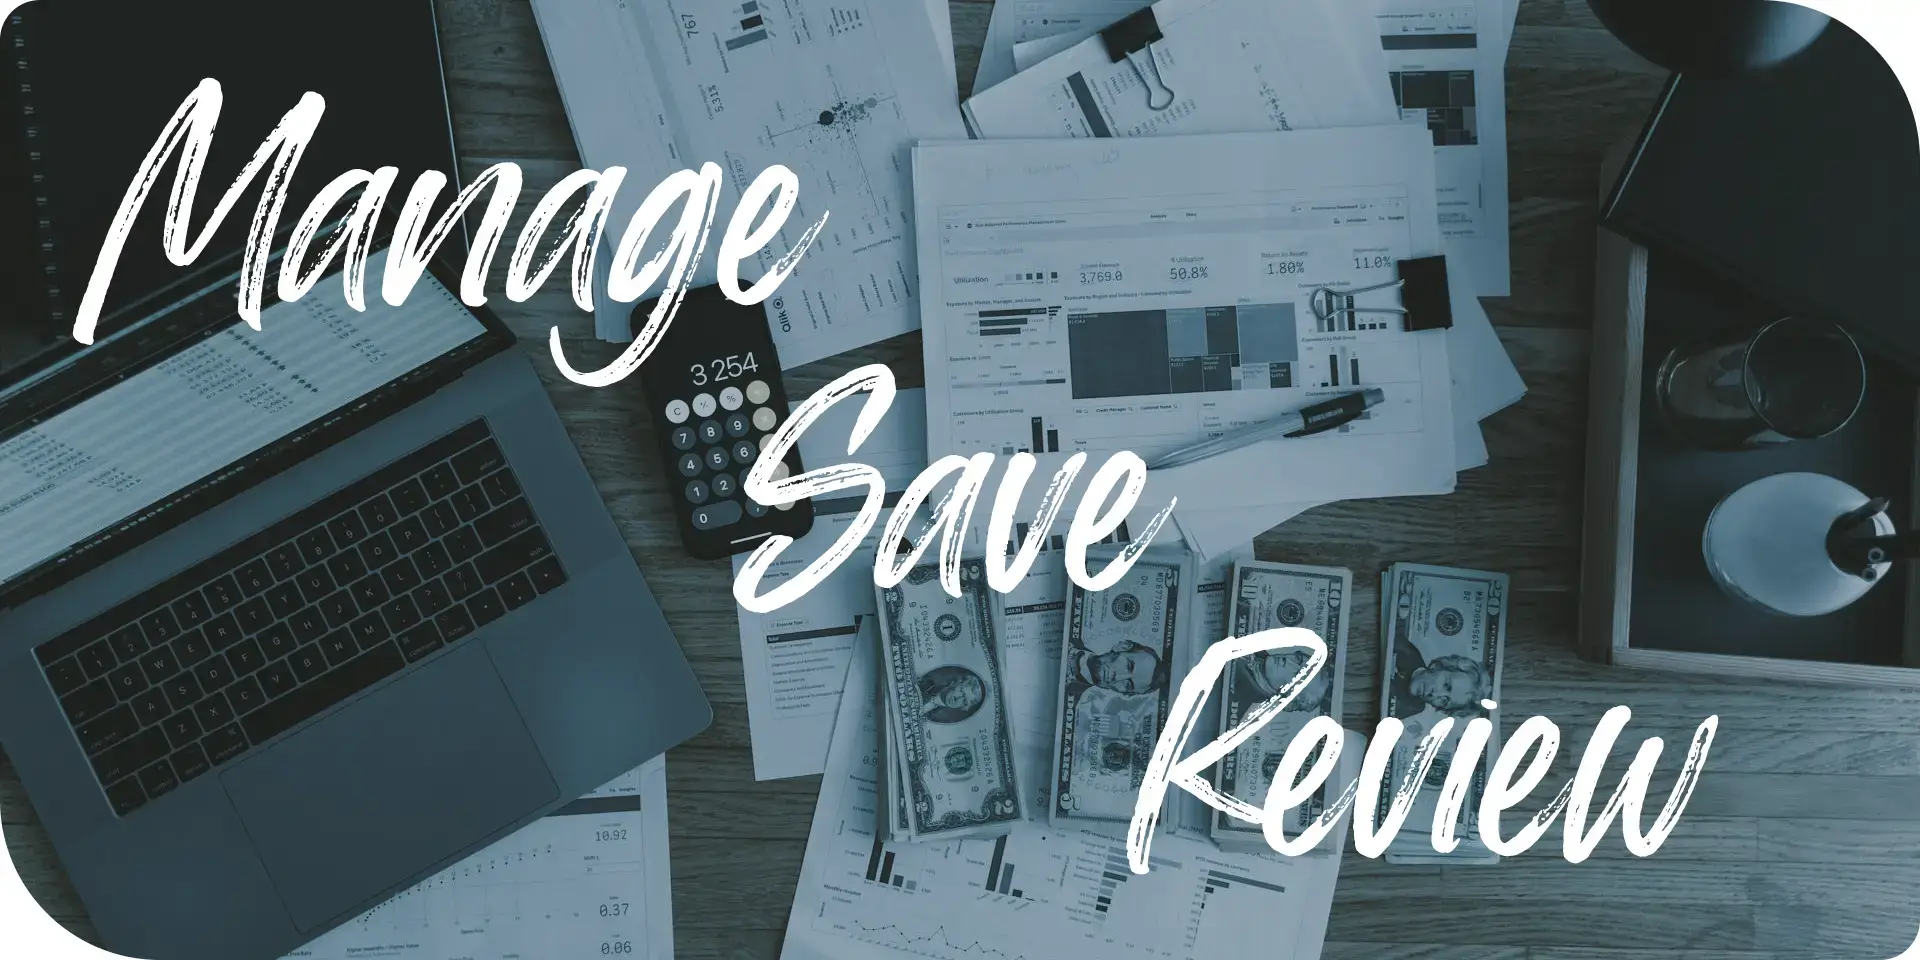 Annual Mortgage Review